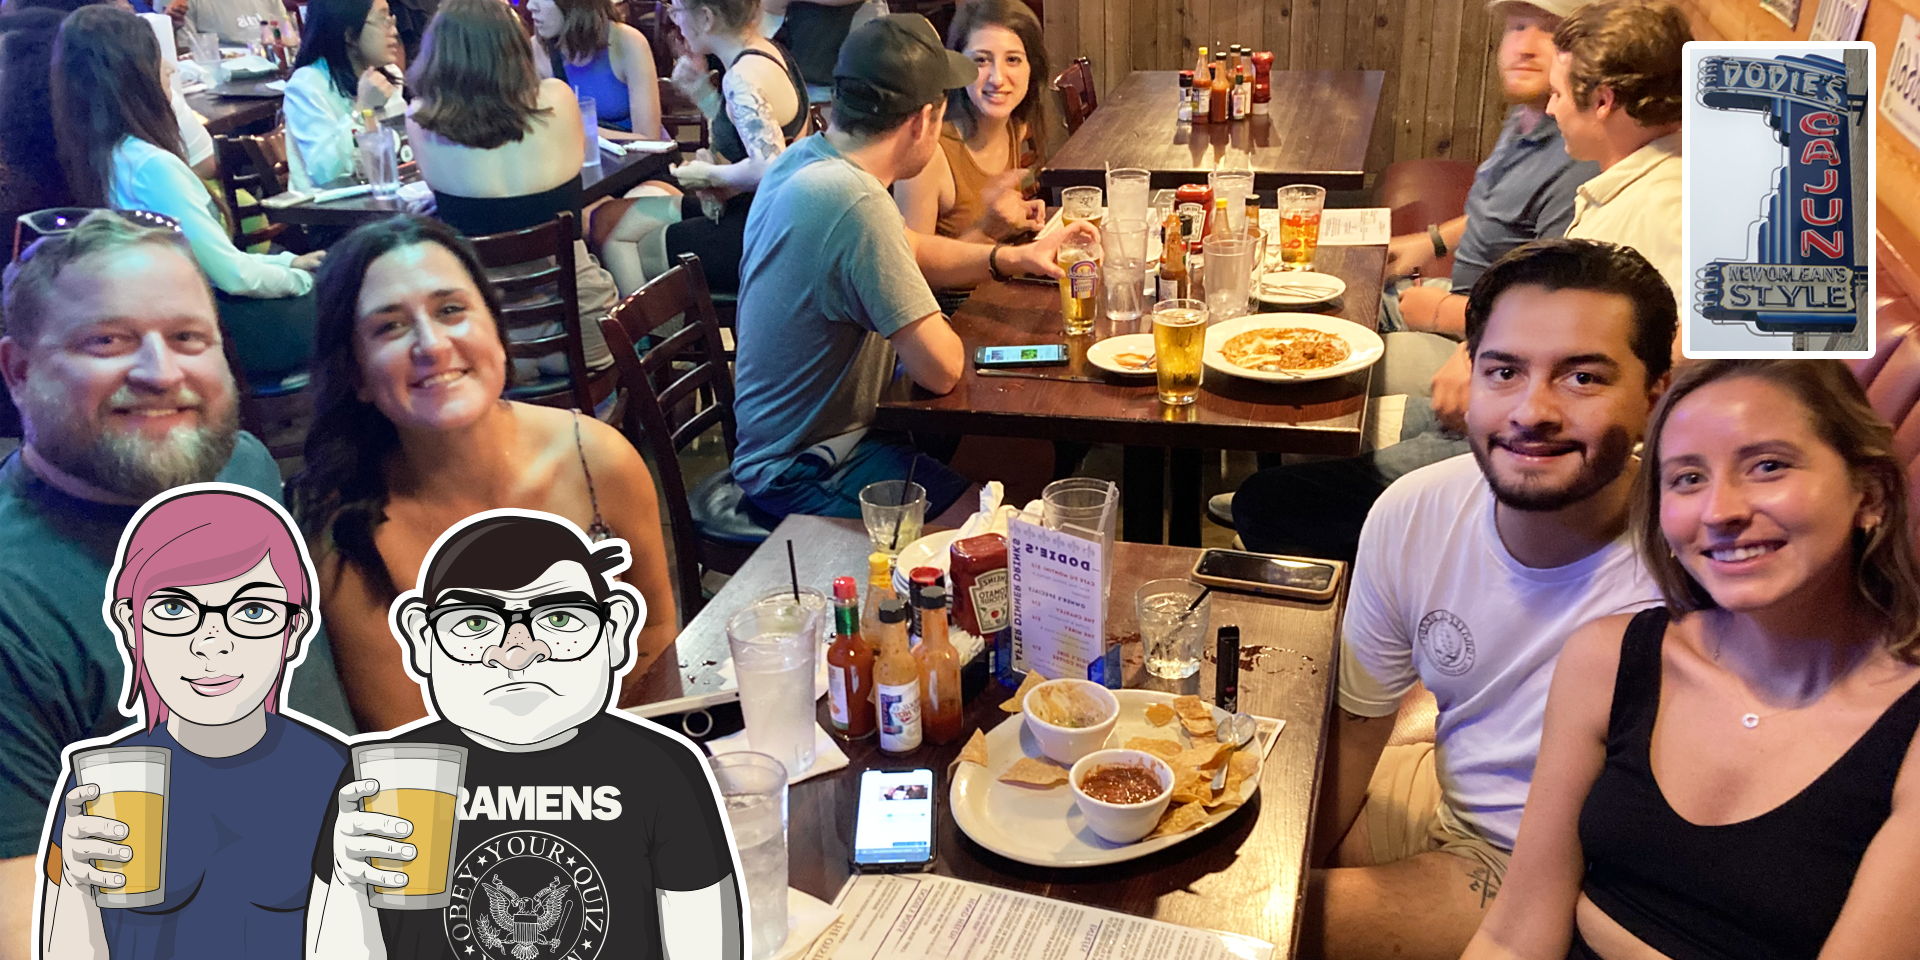 (CANCELED) Geeks Who Drink Trivia Night at Dodie's Reef (Dallas) promotional image